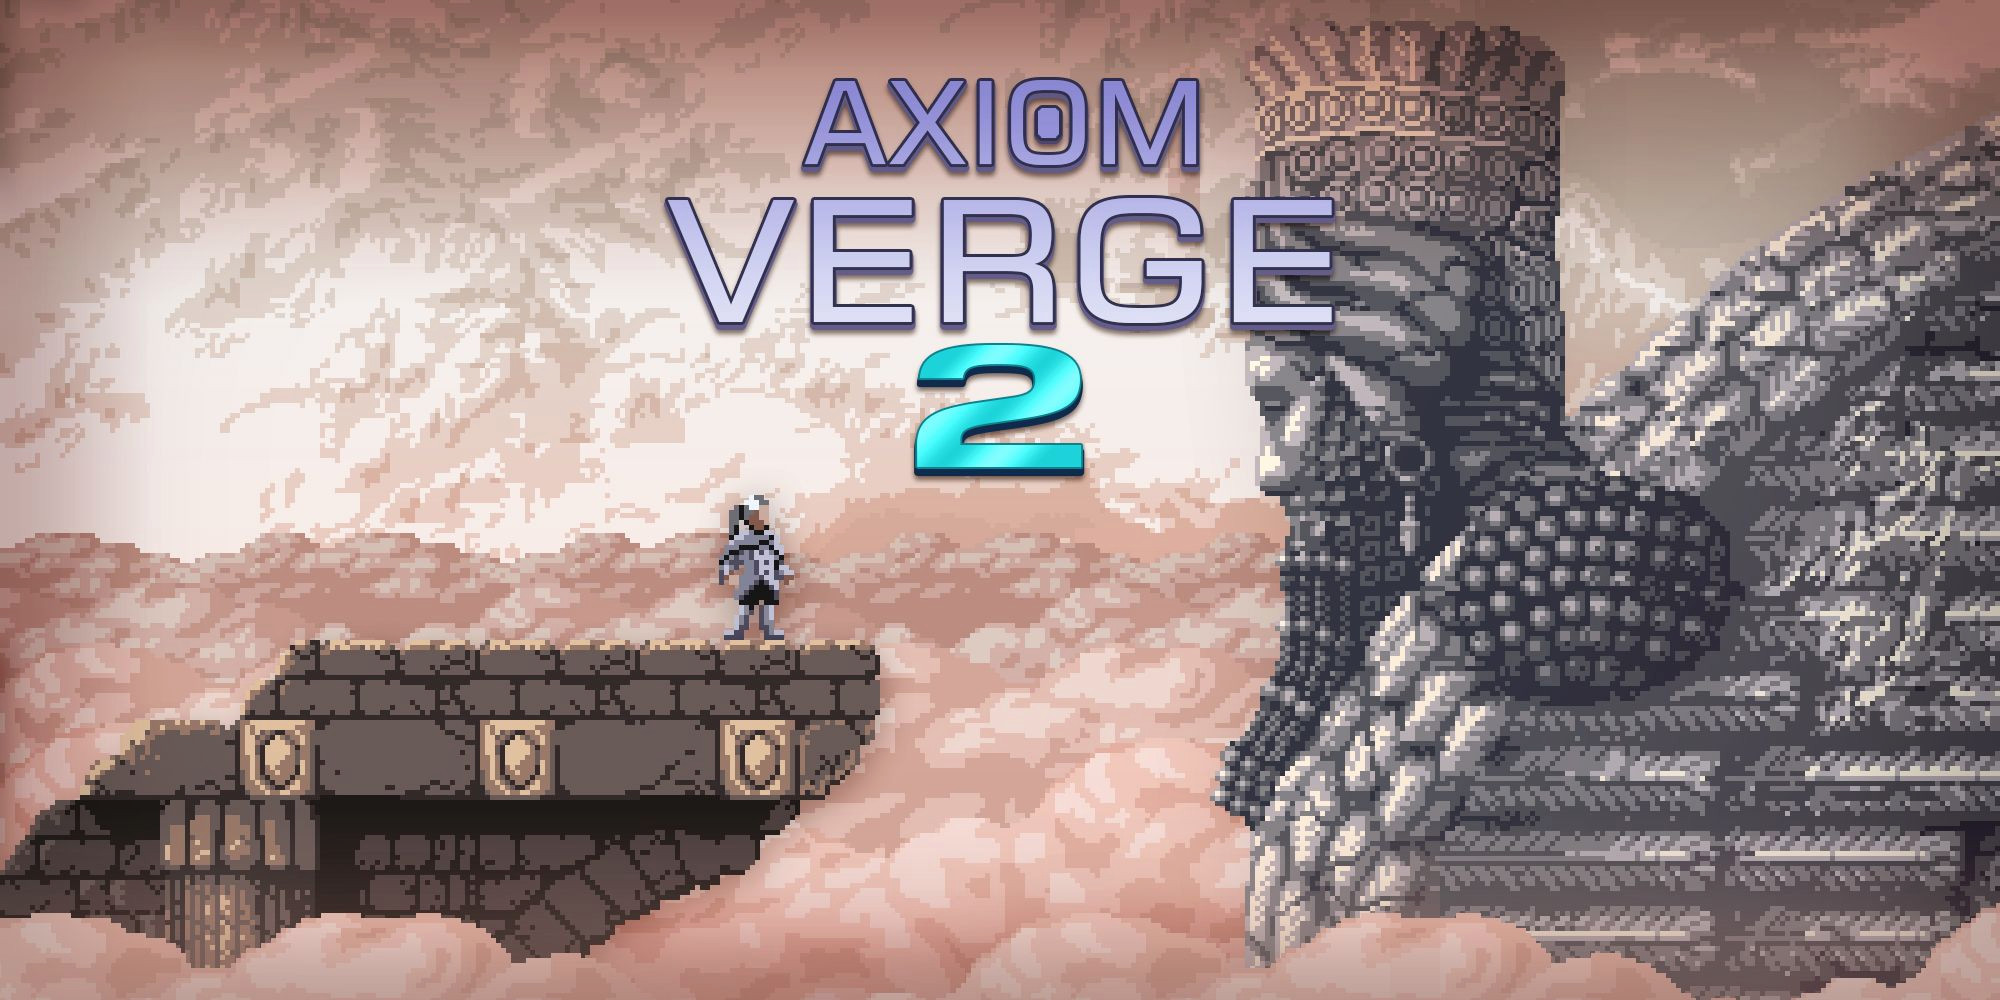 Axiom Verge 2 is out right now on Switch, PS4, and PC after Nintendo Indie World announcement